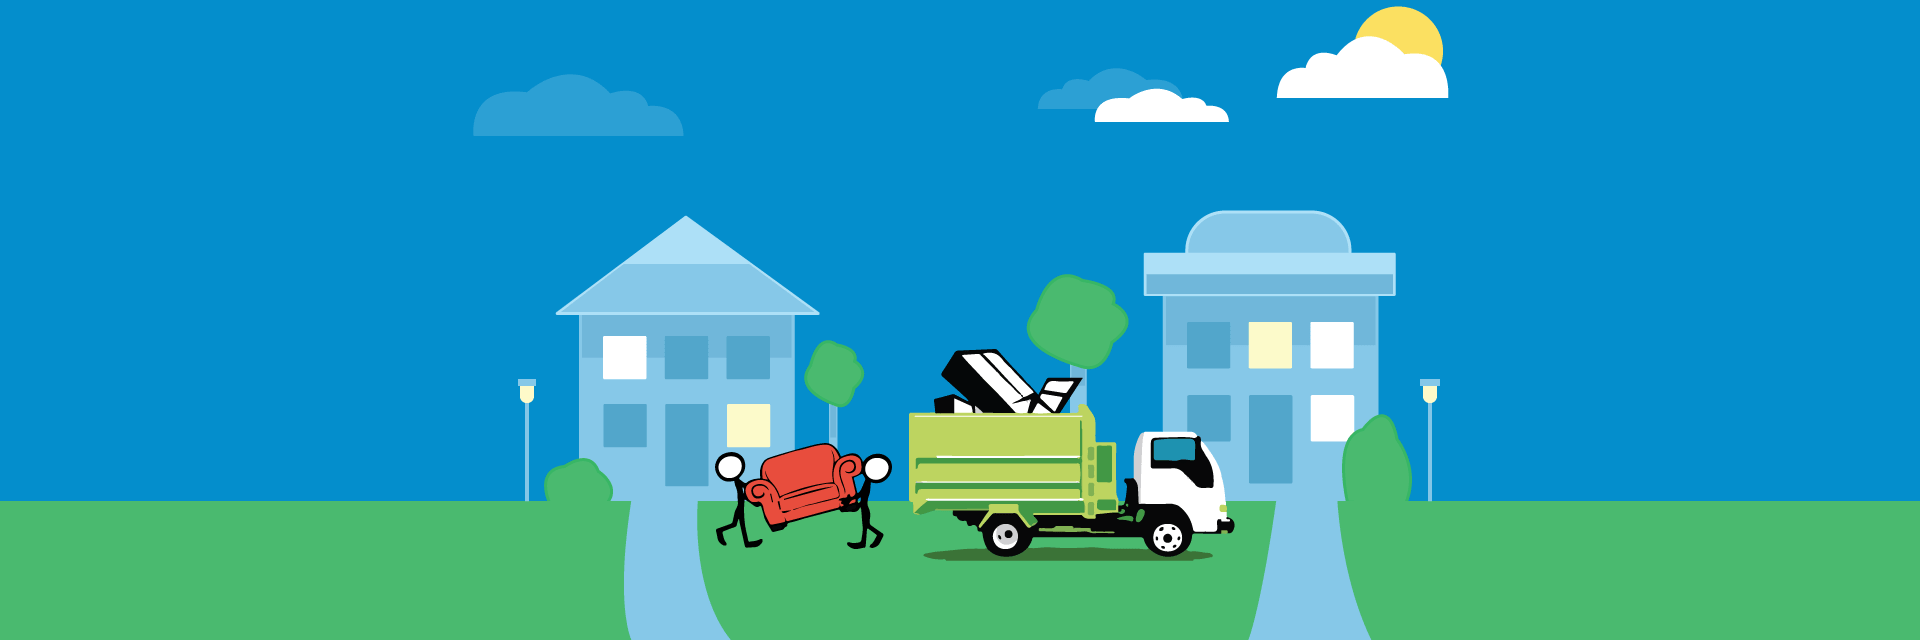 Junk Removal In Edgewood Florida